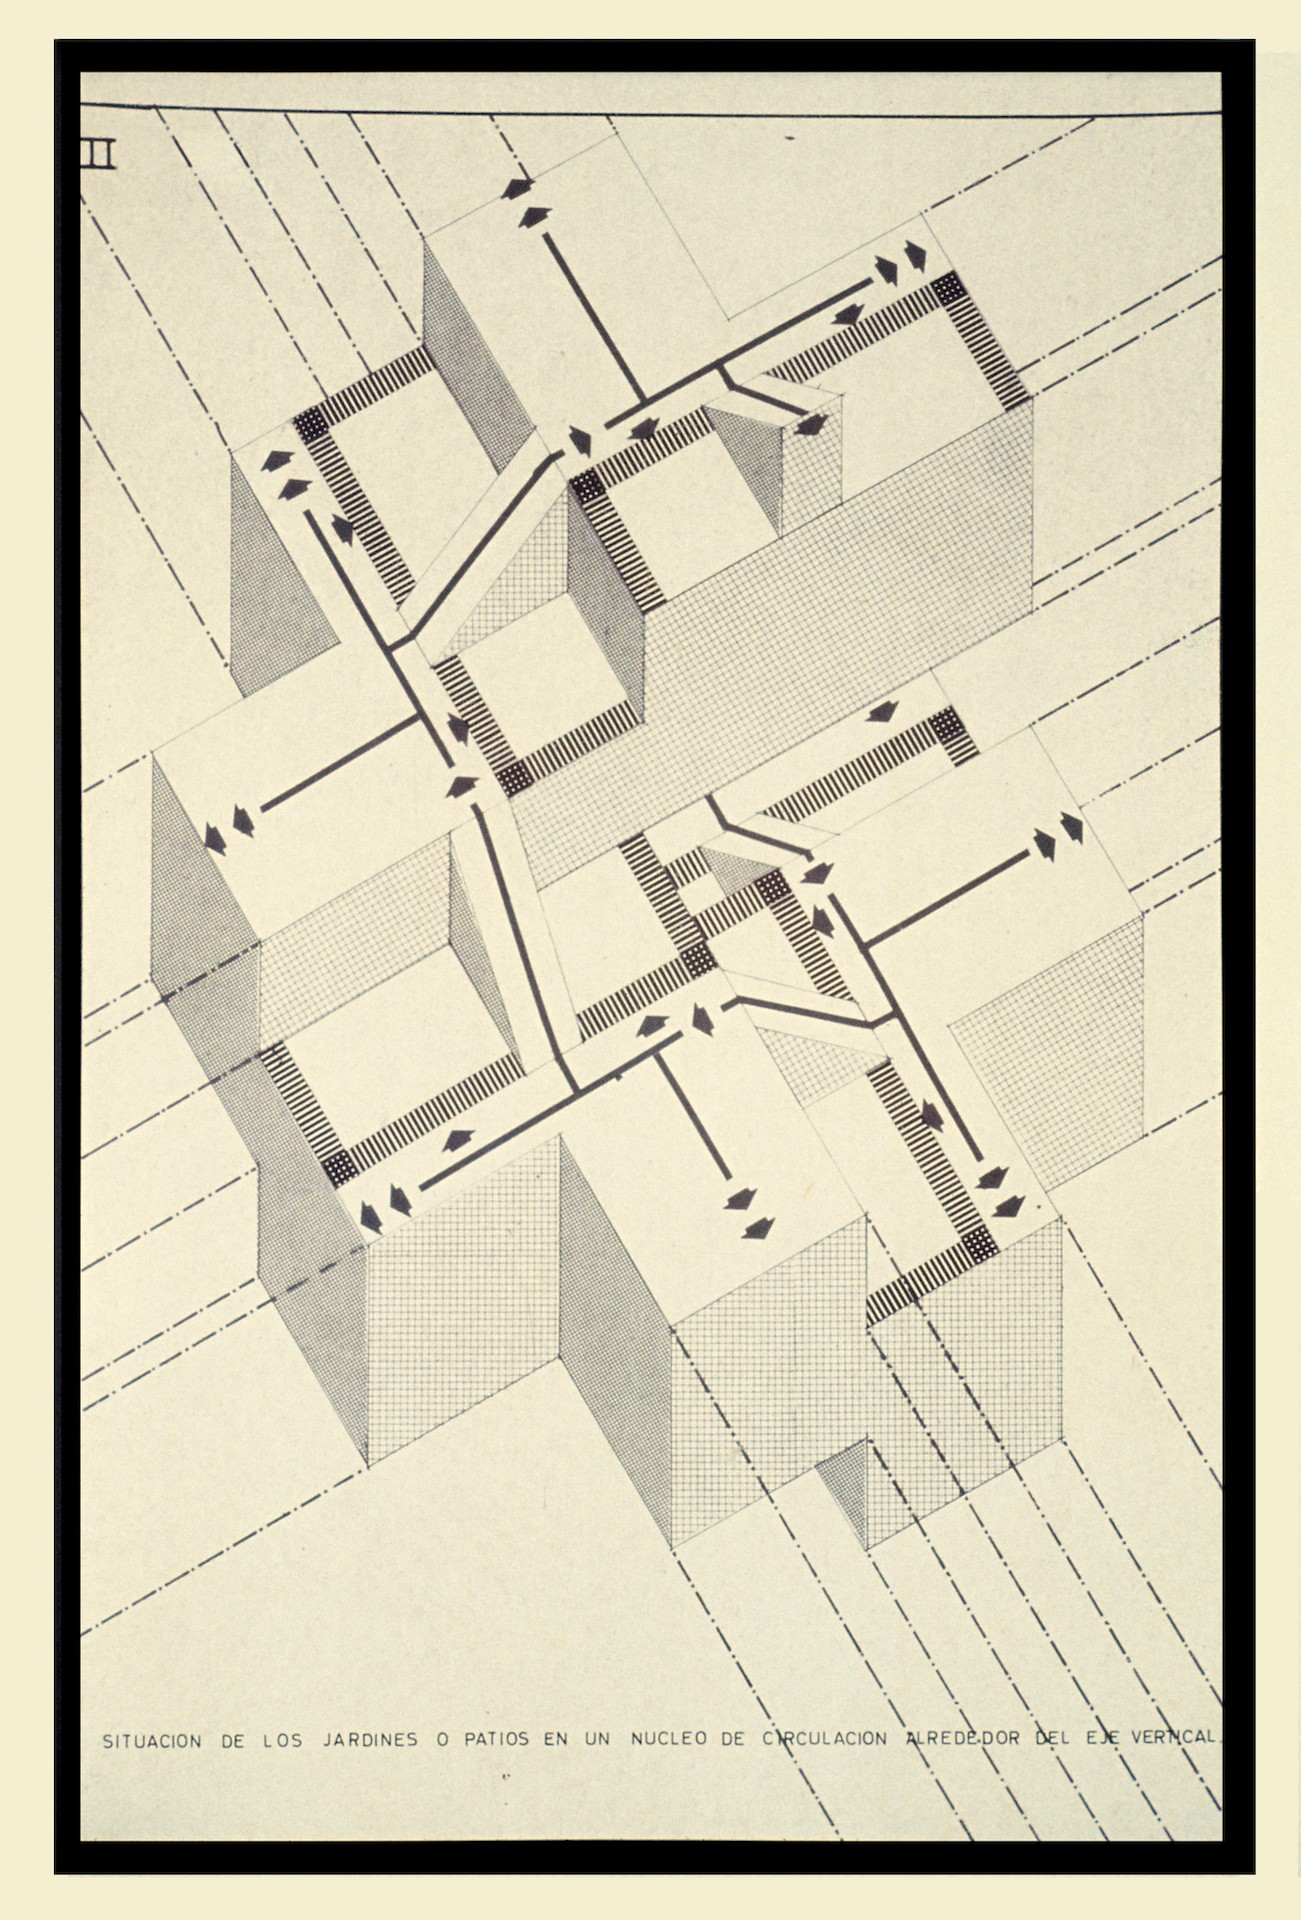 City in the Space circulation diagram by Ricardo Bofill, 1970.